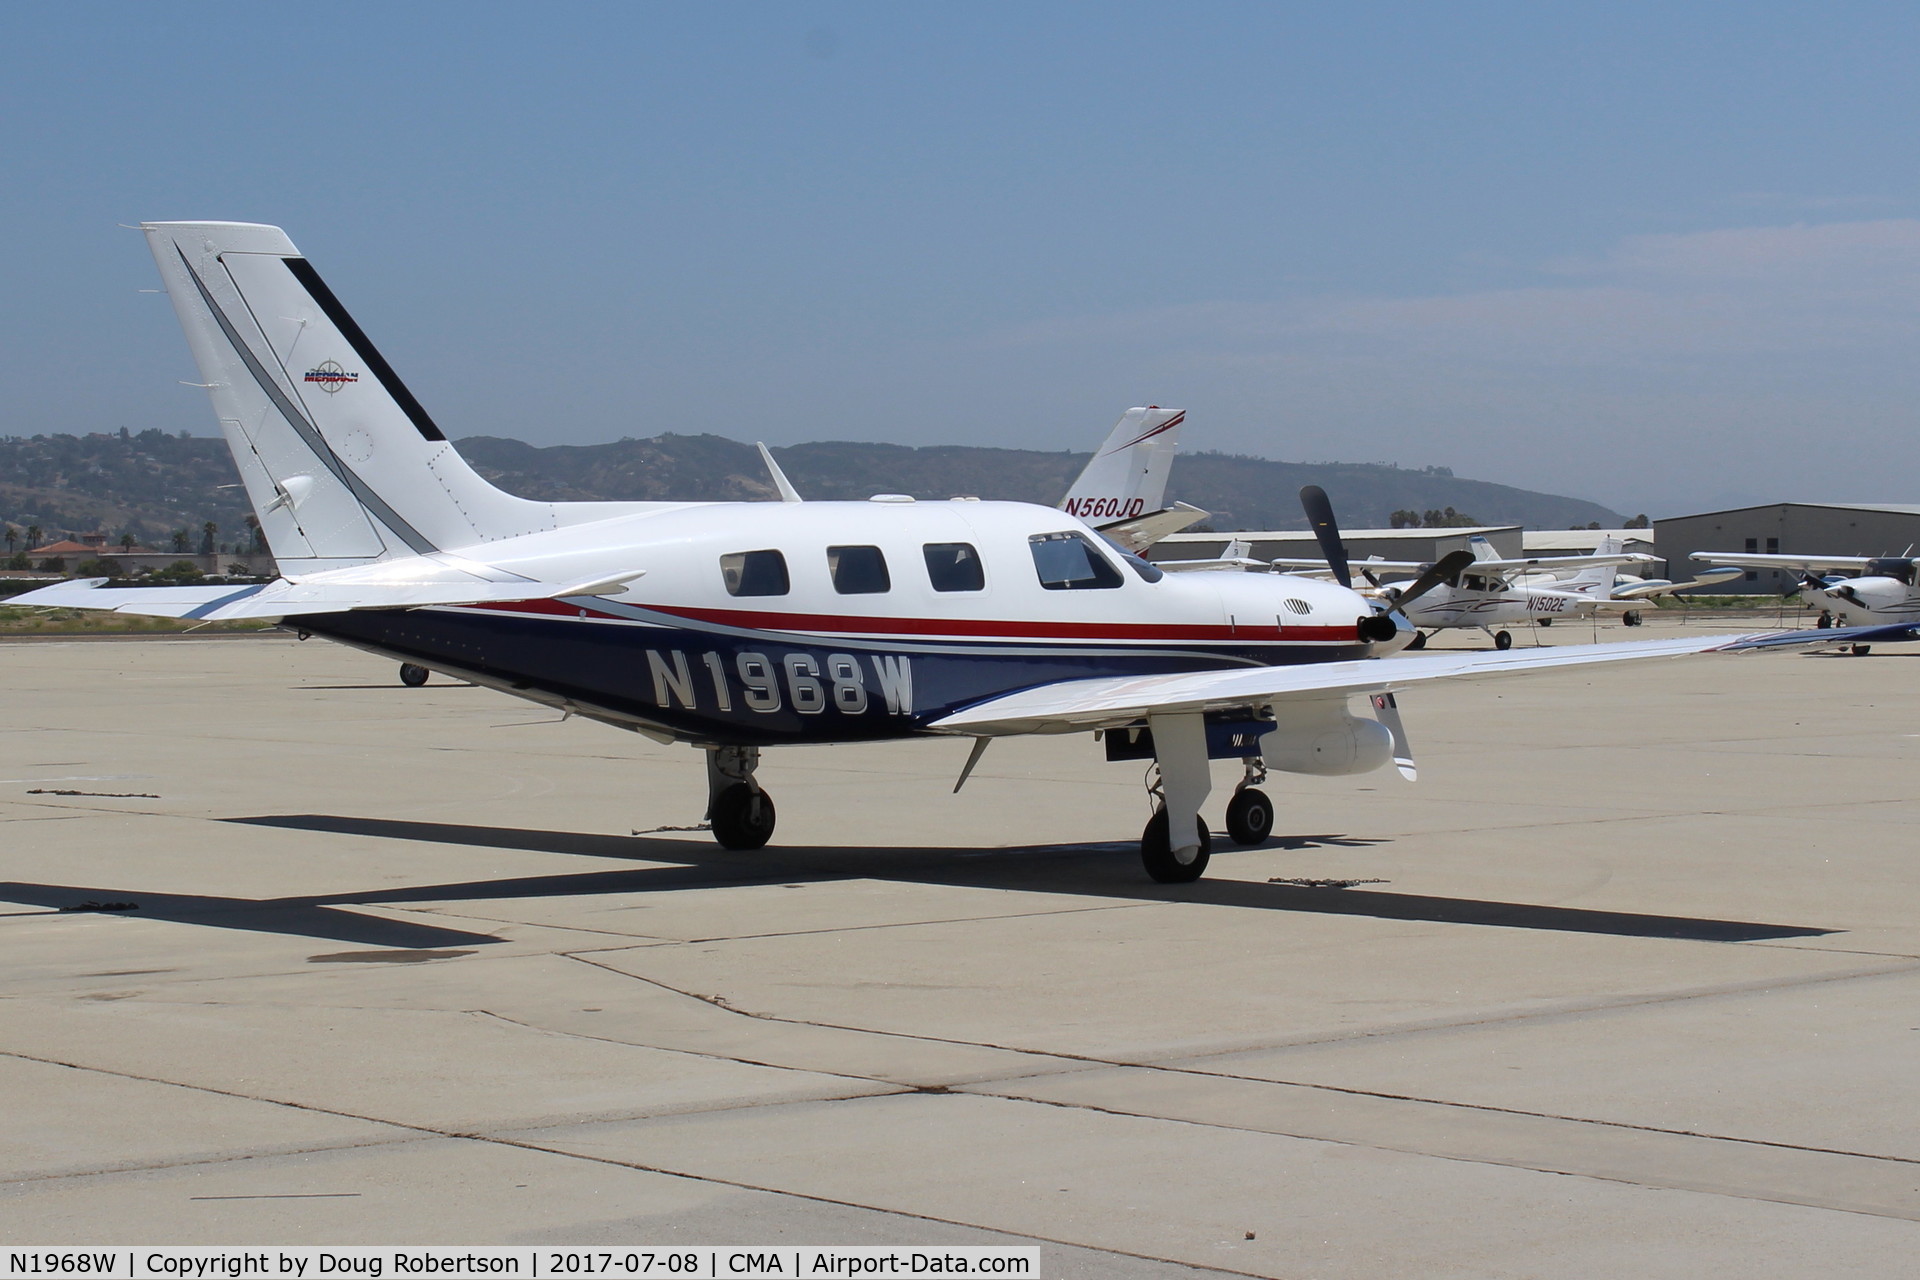 N1968W, 2001 Piper PA-46-500TP C/N 4697115, 2001 Piper PA-46-500TP MALIBU MERIDIAN, one P&W(C)PT6A-42A Turboprop, derated to 500 sHp for takeoff, six seats